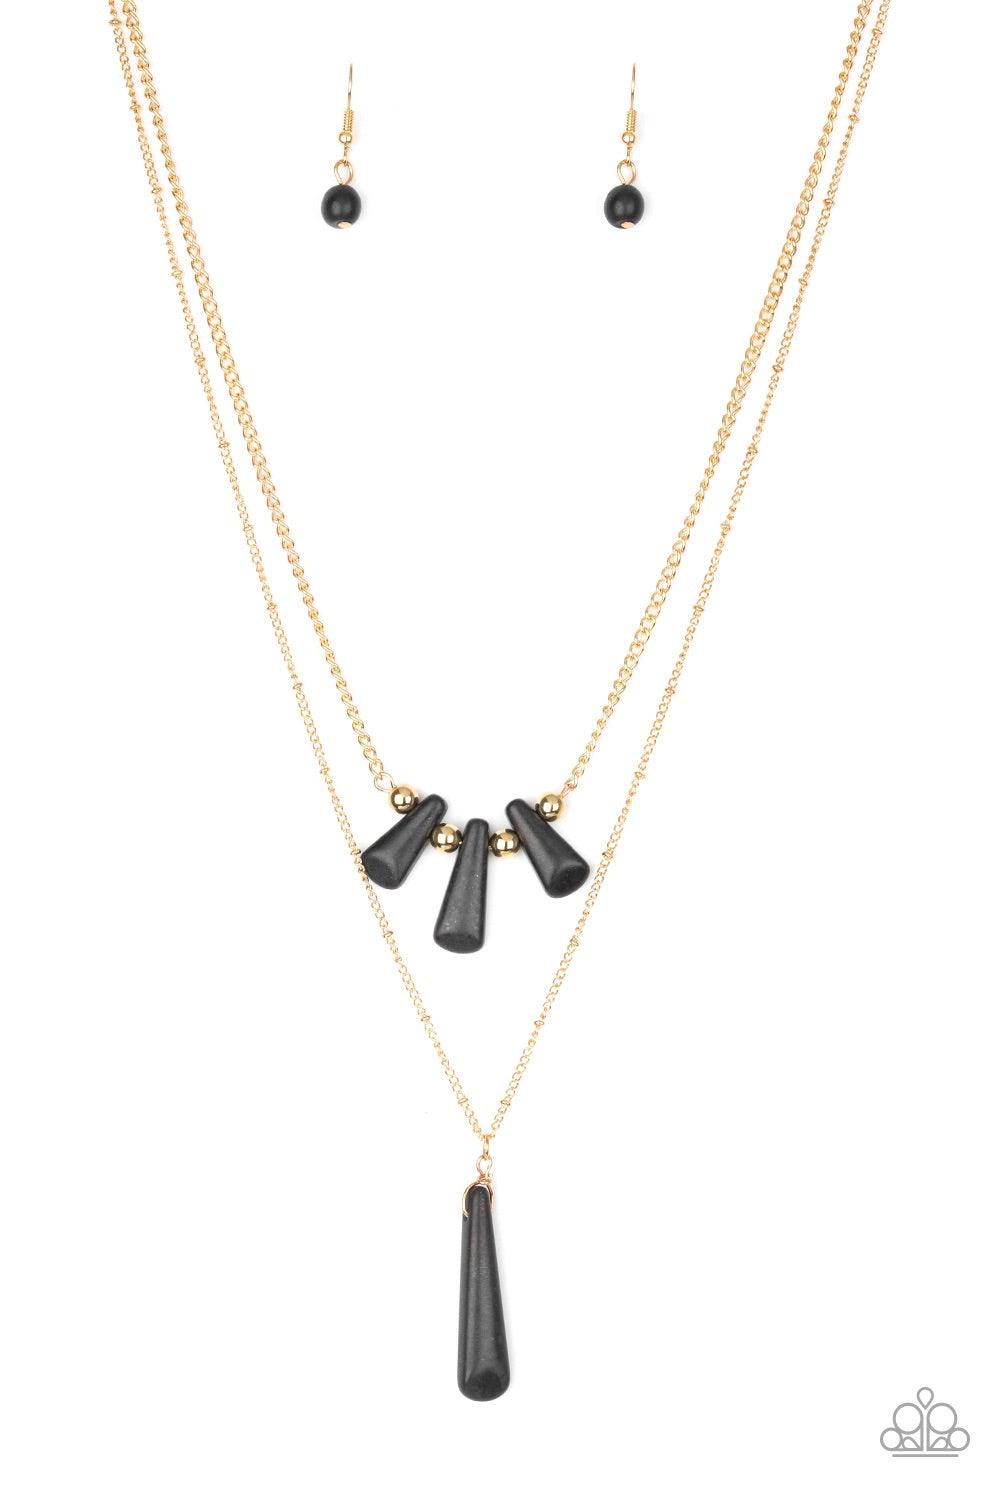 Paparazzi Accessories Basic Groundwork - Black Chiseled into flared teardrop shapes, a dainty fringe of black stones and golden beads gives way to a large stone pendant, creating earthy layers down the chest. Features an adjustable clasp closure. Jewelry